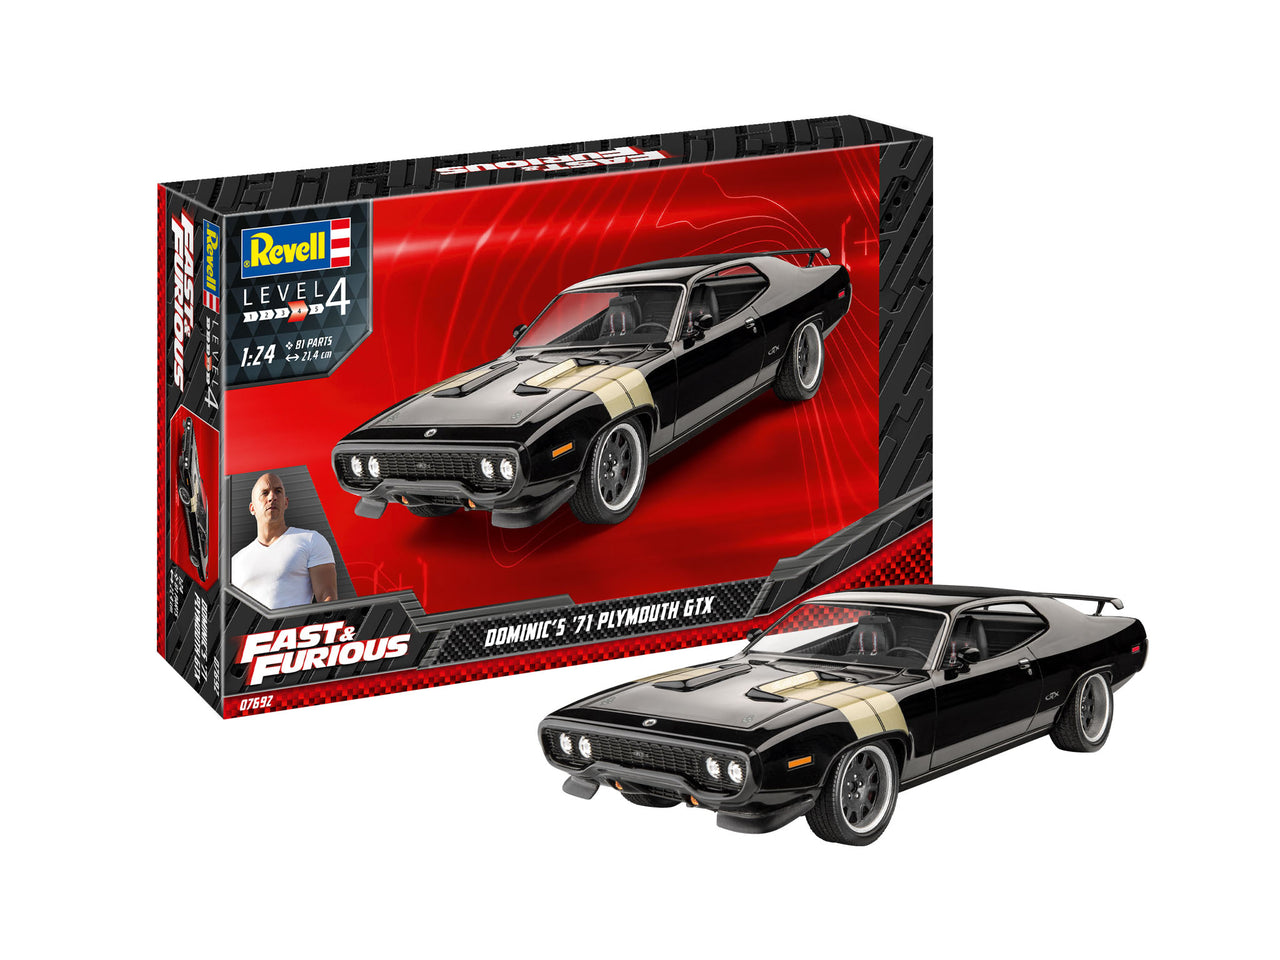 RVG7692 FAST & FURIOUS DOMINIC'S 1971 PLYMOUTH GTX (1/24)